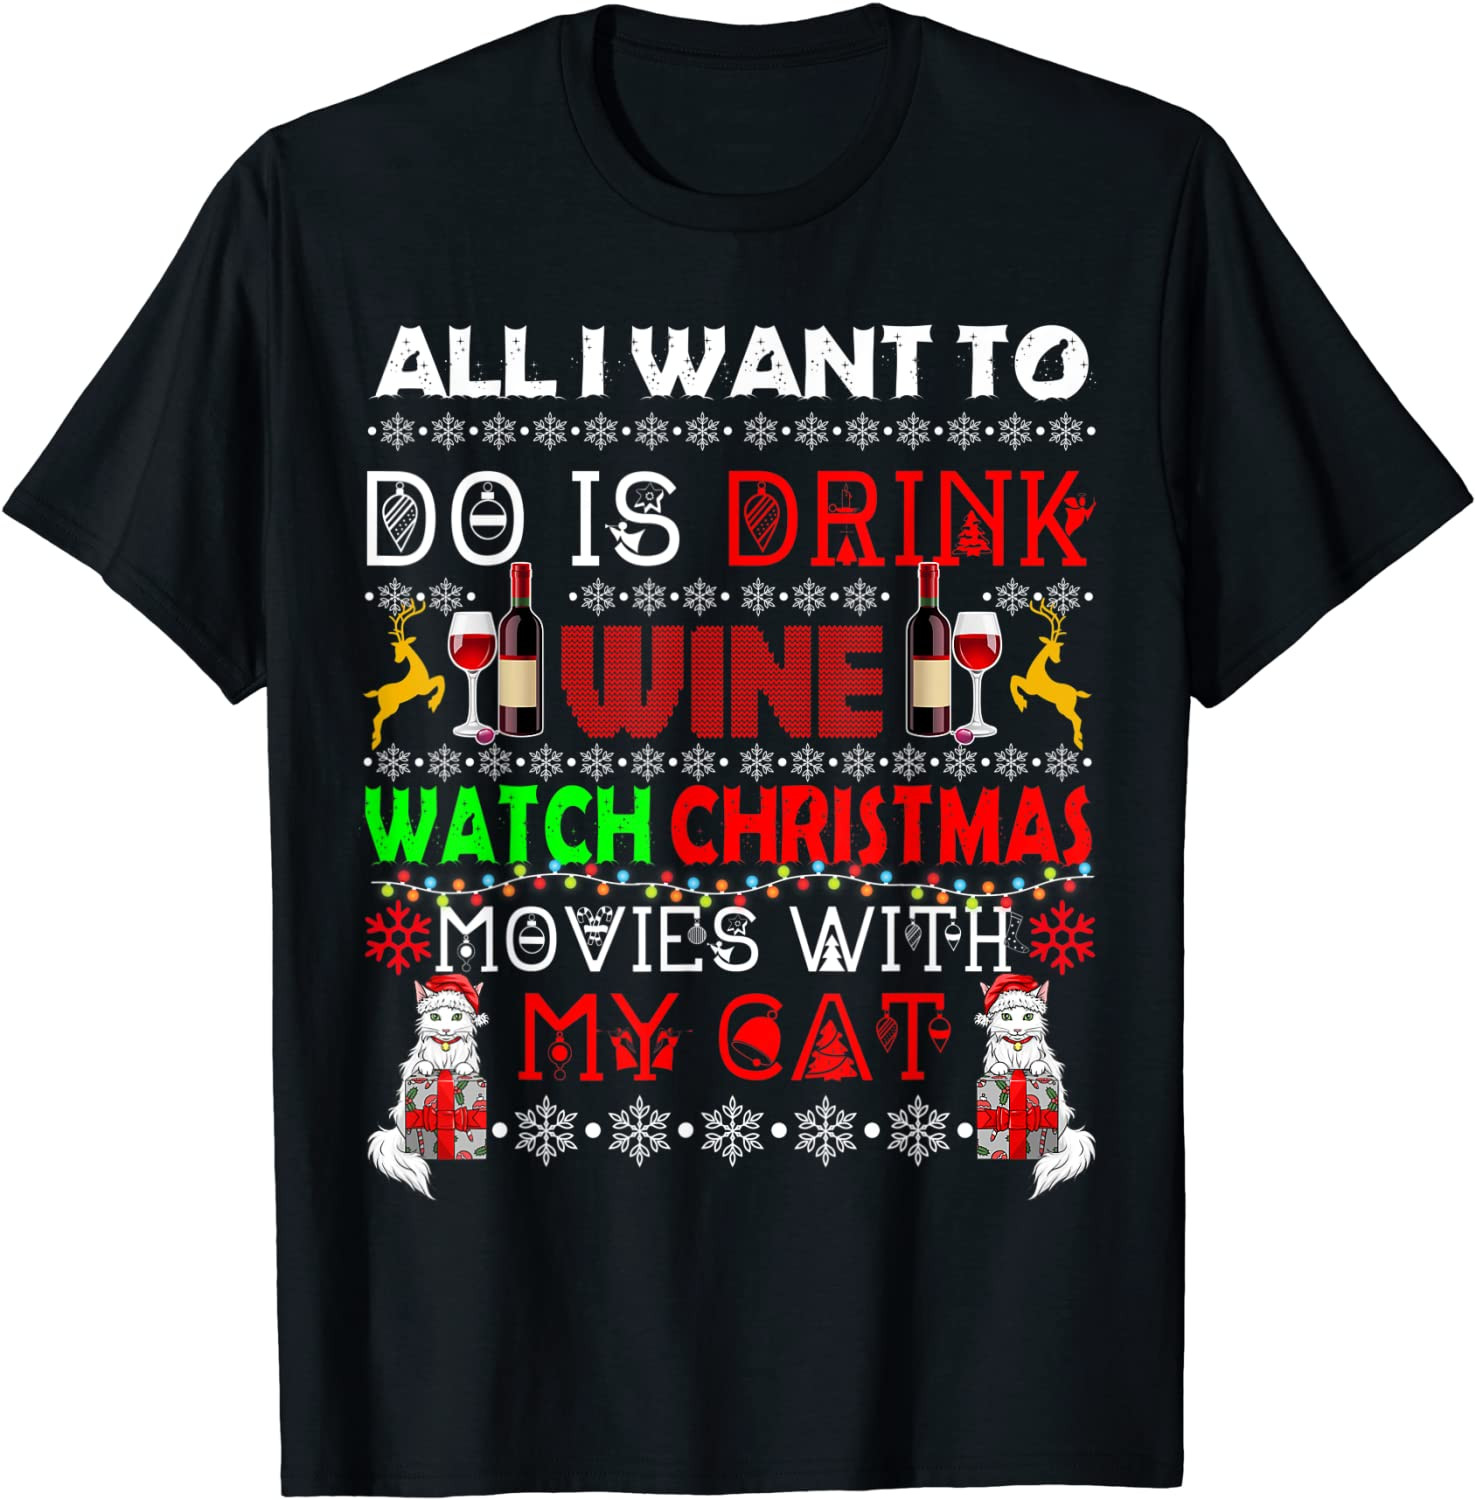 All I Want To Do Is Drink Wine Watch Xmas Movies With My Cat T-Shirt